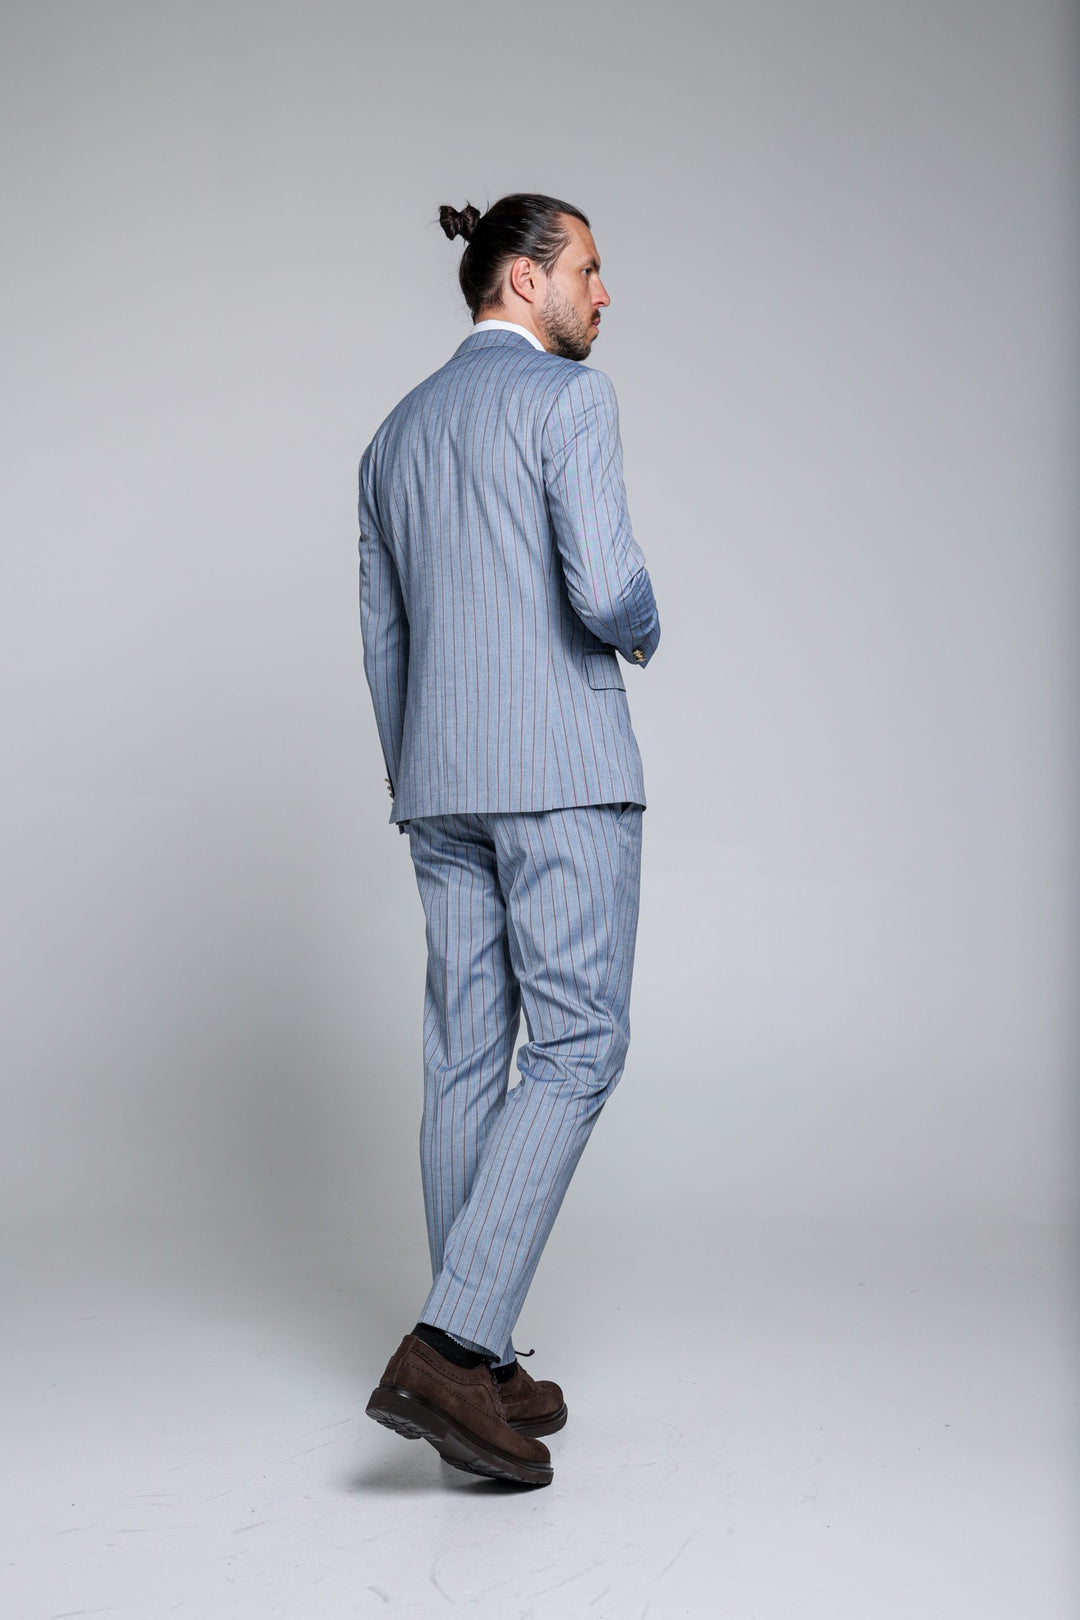 Two-piece light blue suit with stripes and double-breasted jacket